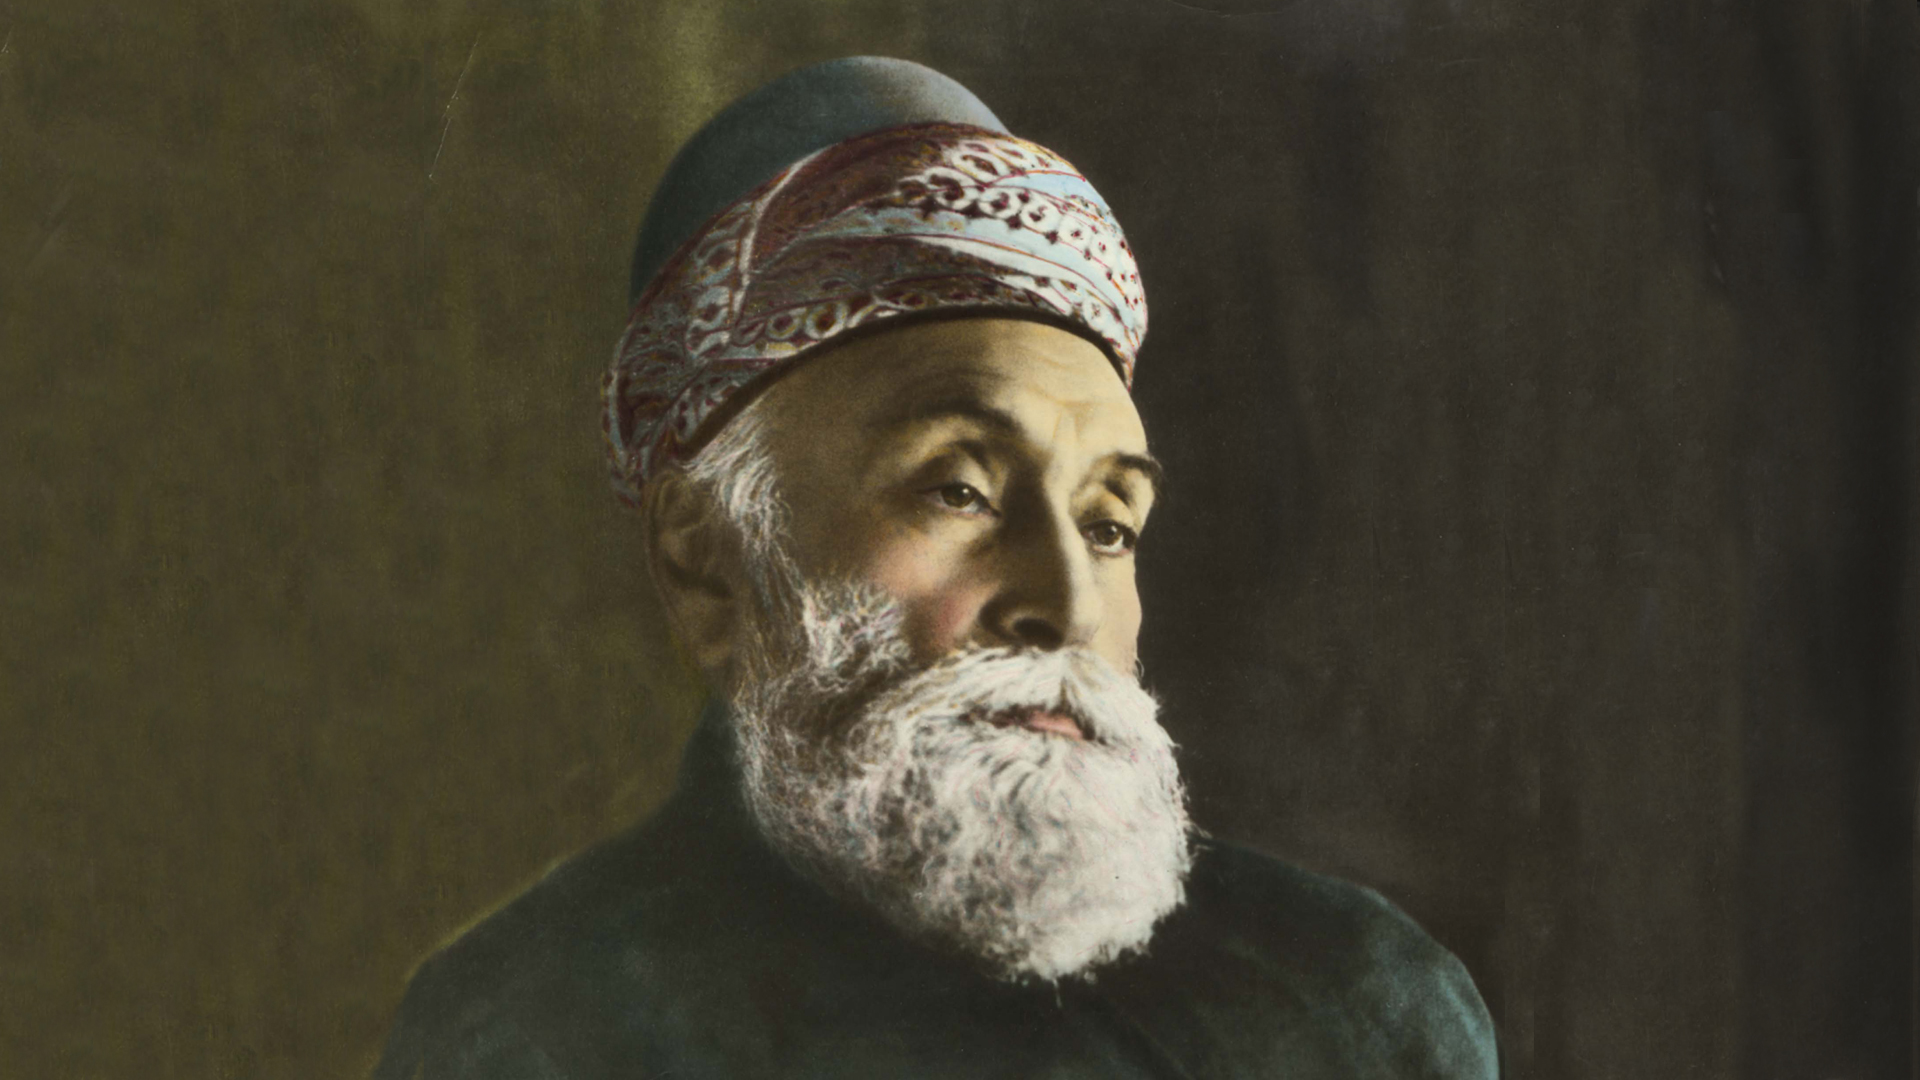 For the love of India: The Life & Times Of Jamsetji Tata